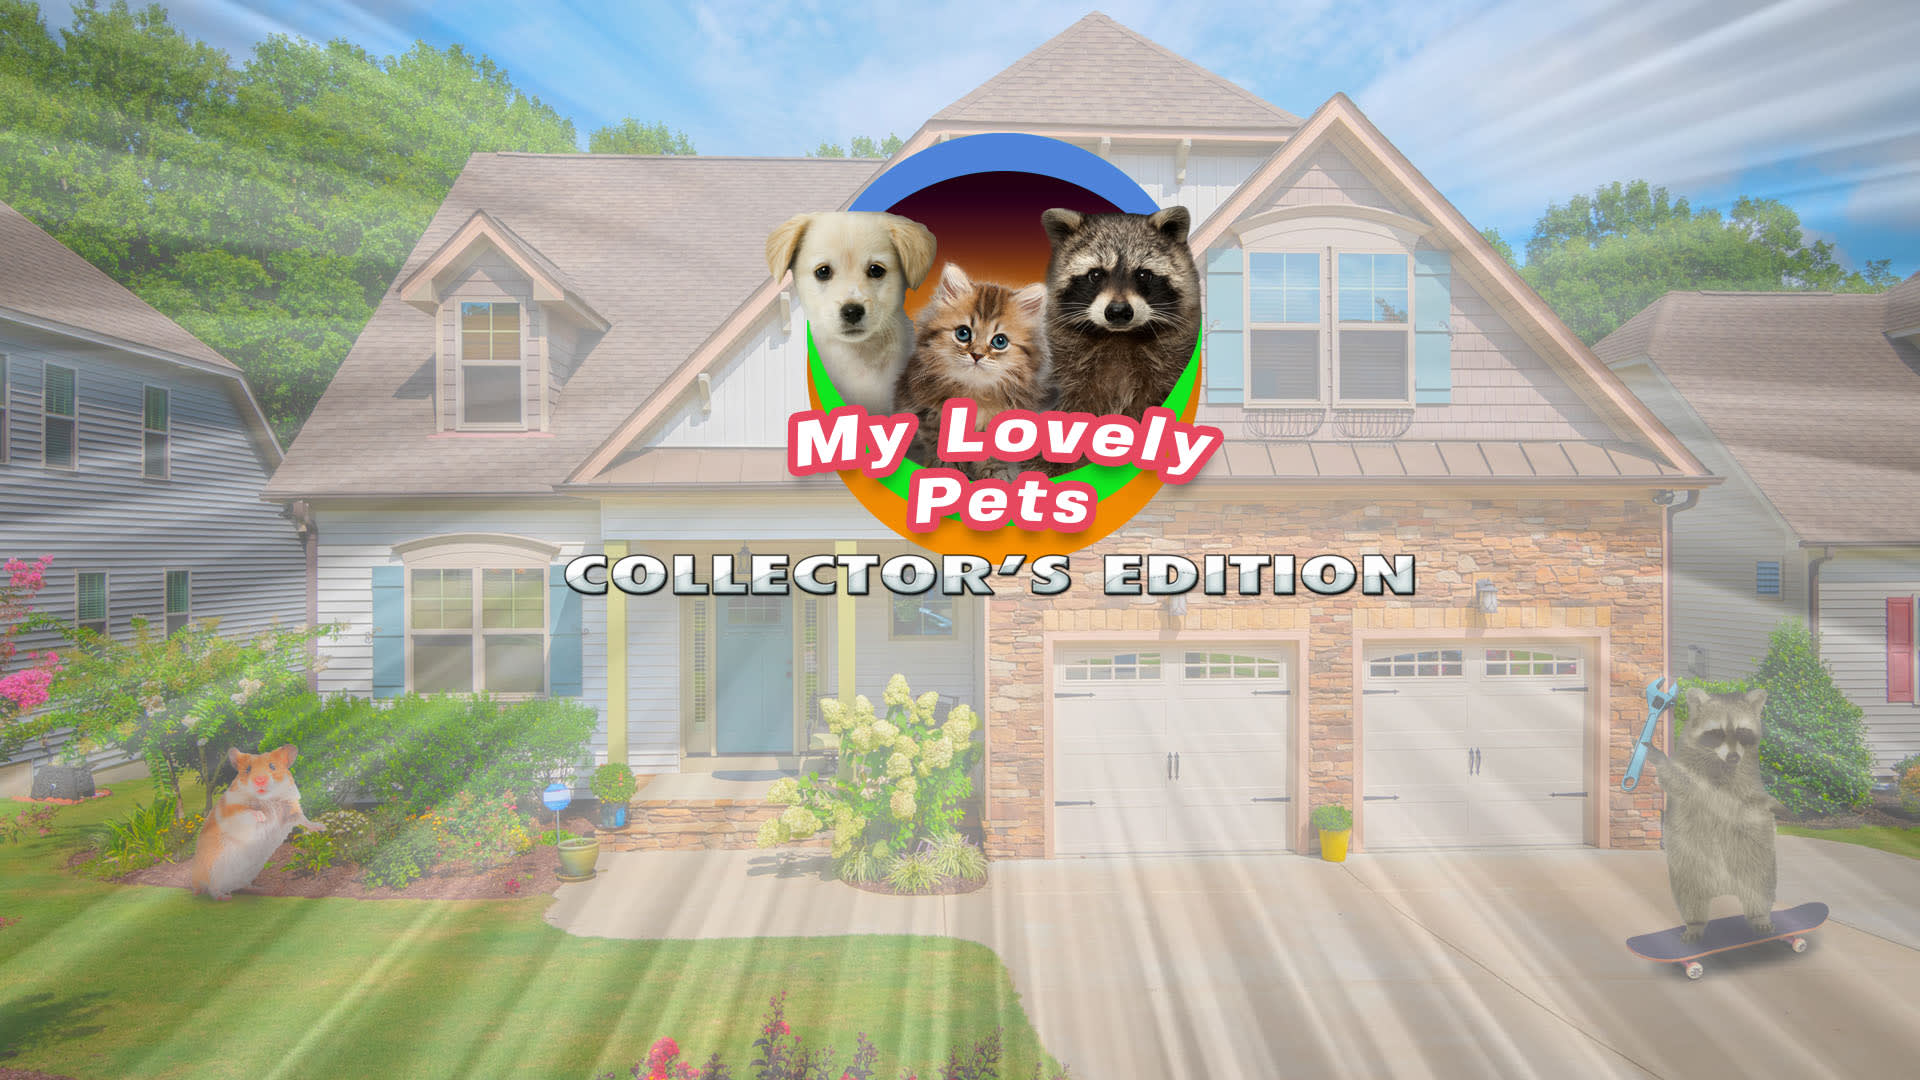 My Lovely Pets Collector's Edition